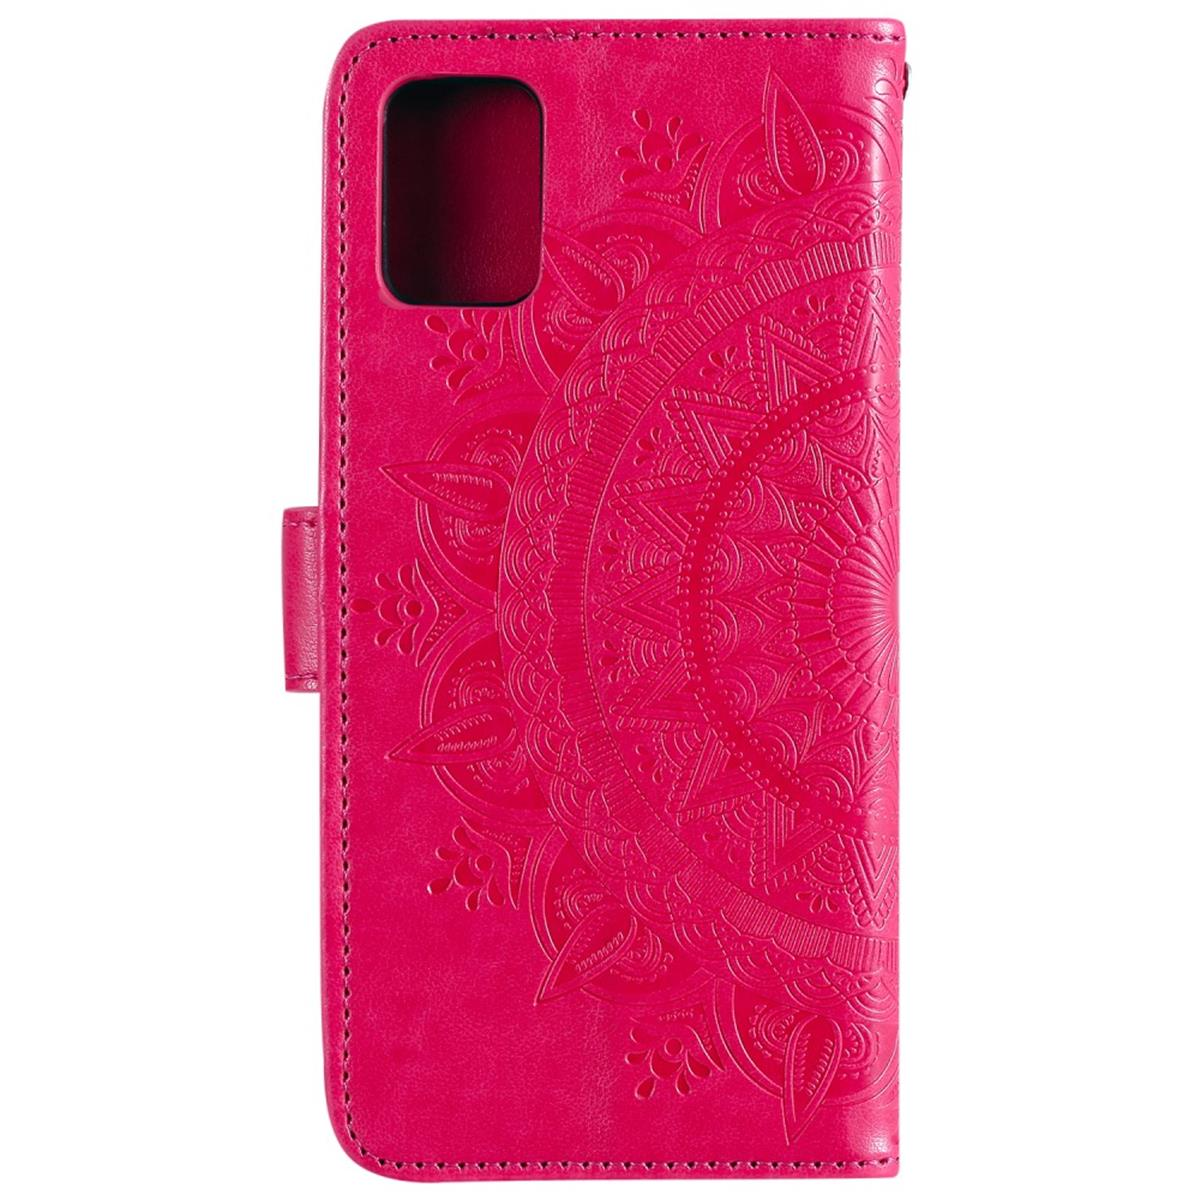 COVERKINGZ Klapphülle mit Mandala Muster, Bookcover, Samsung, Note20, Pink Galaxy